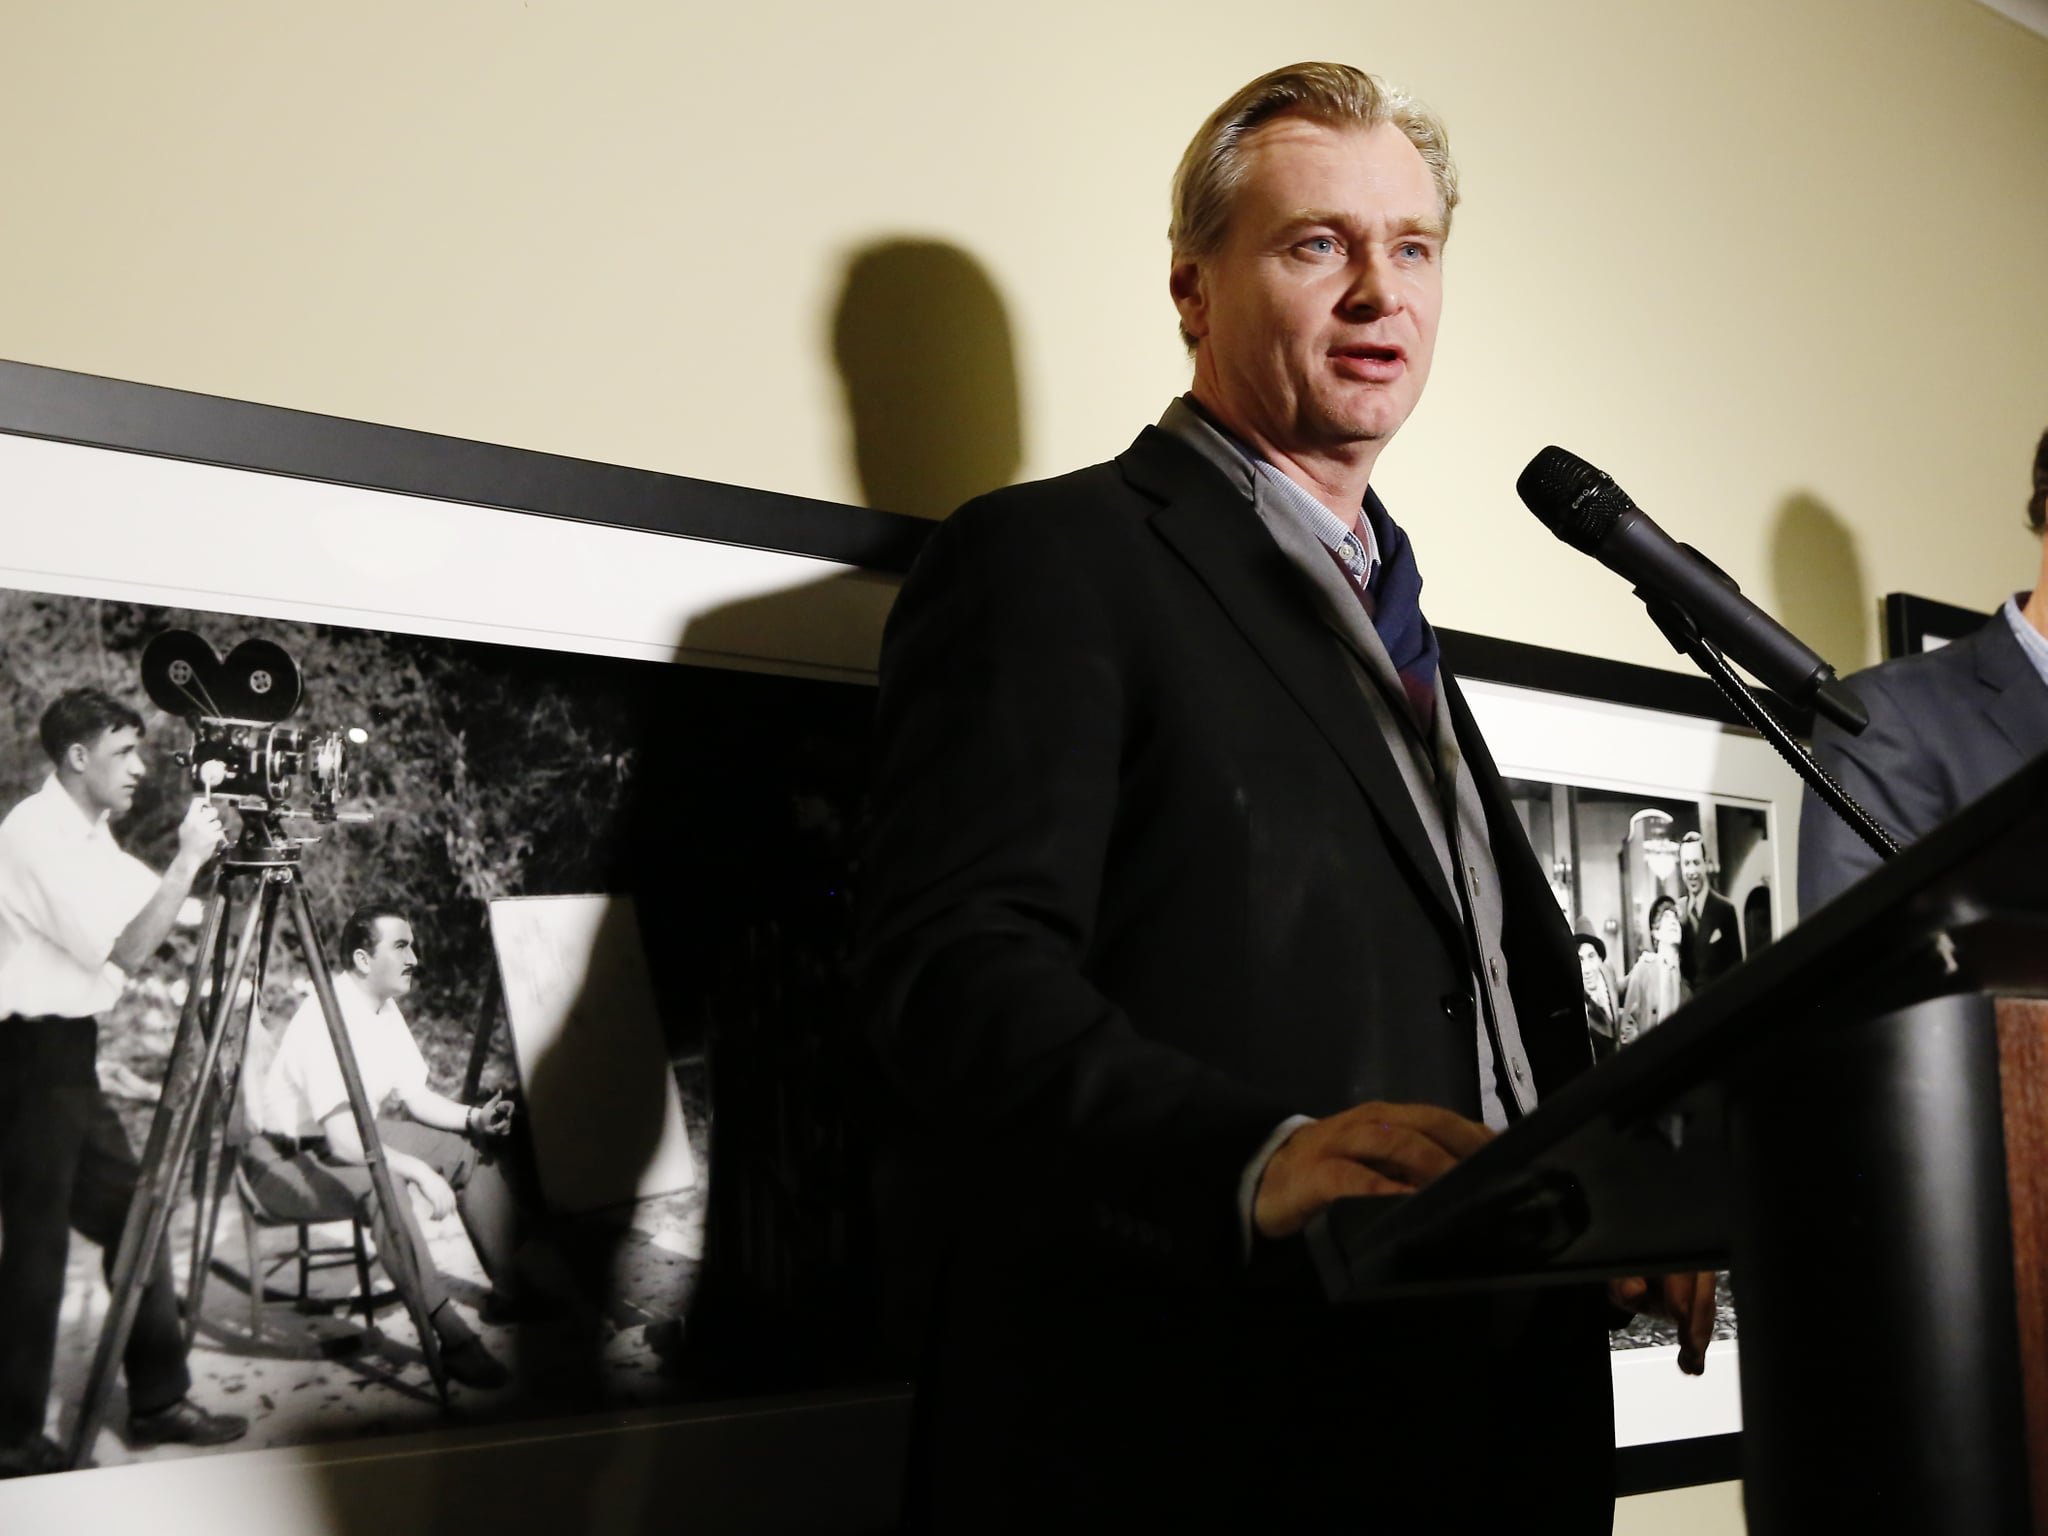 LOS ANGELES, CALIFORNIA - JANUARY 29: Christopher Nolan speaks onstage during the Fourth Annual Kodak Film Awards at ASC Clubhouse on January 29, 2020 in Los Angeles, California. (Photo by Rachel Murray/Getty Images for Kodak)